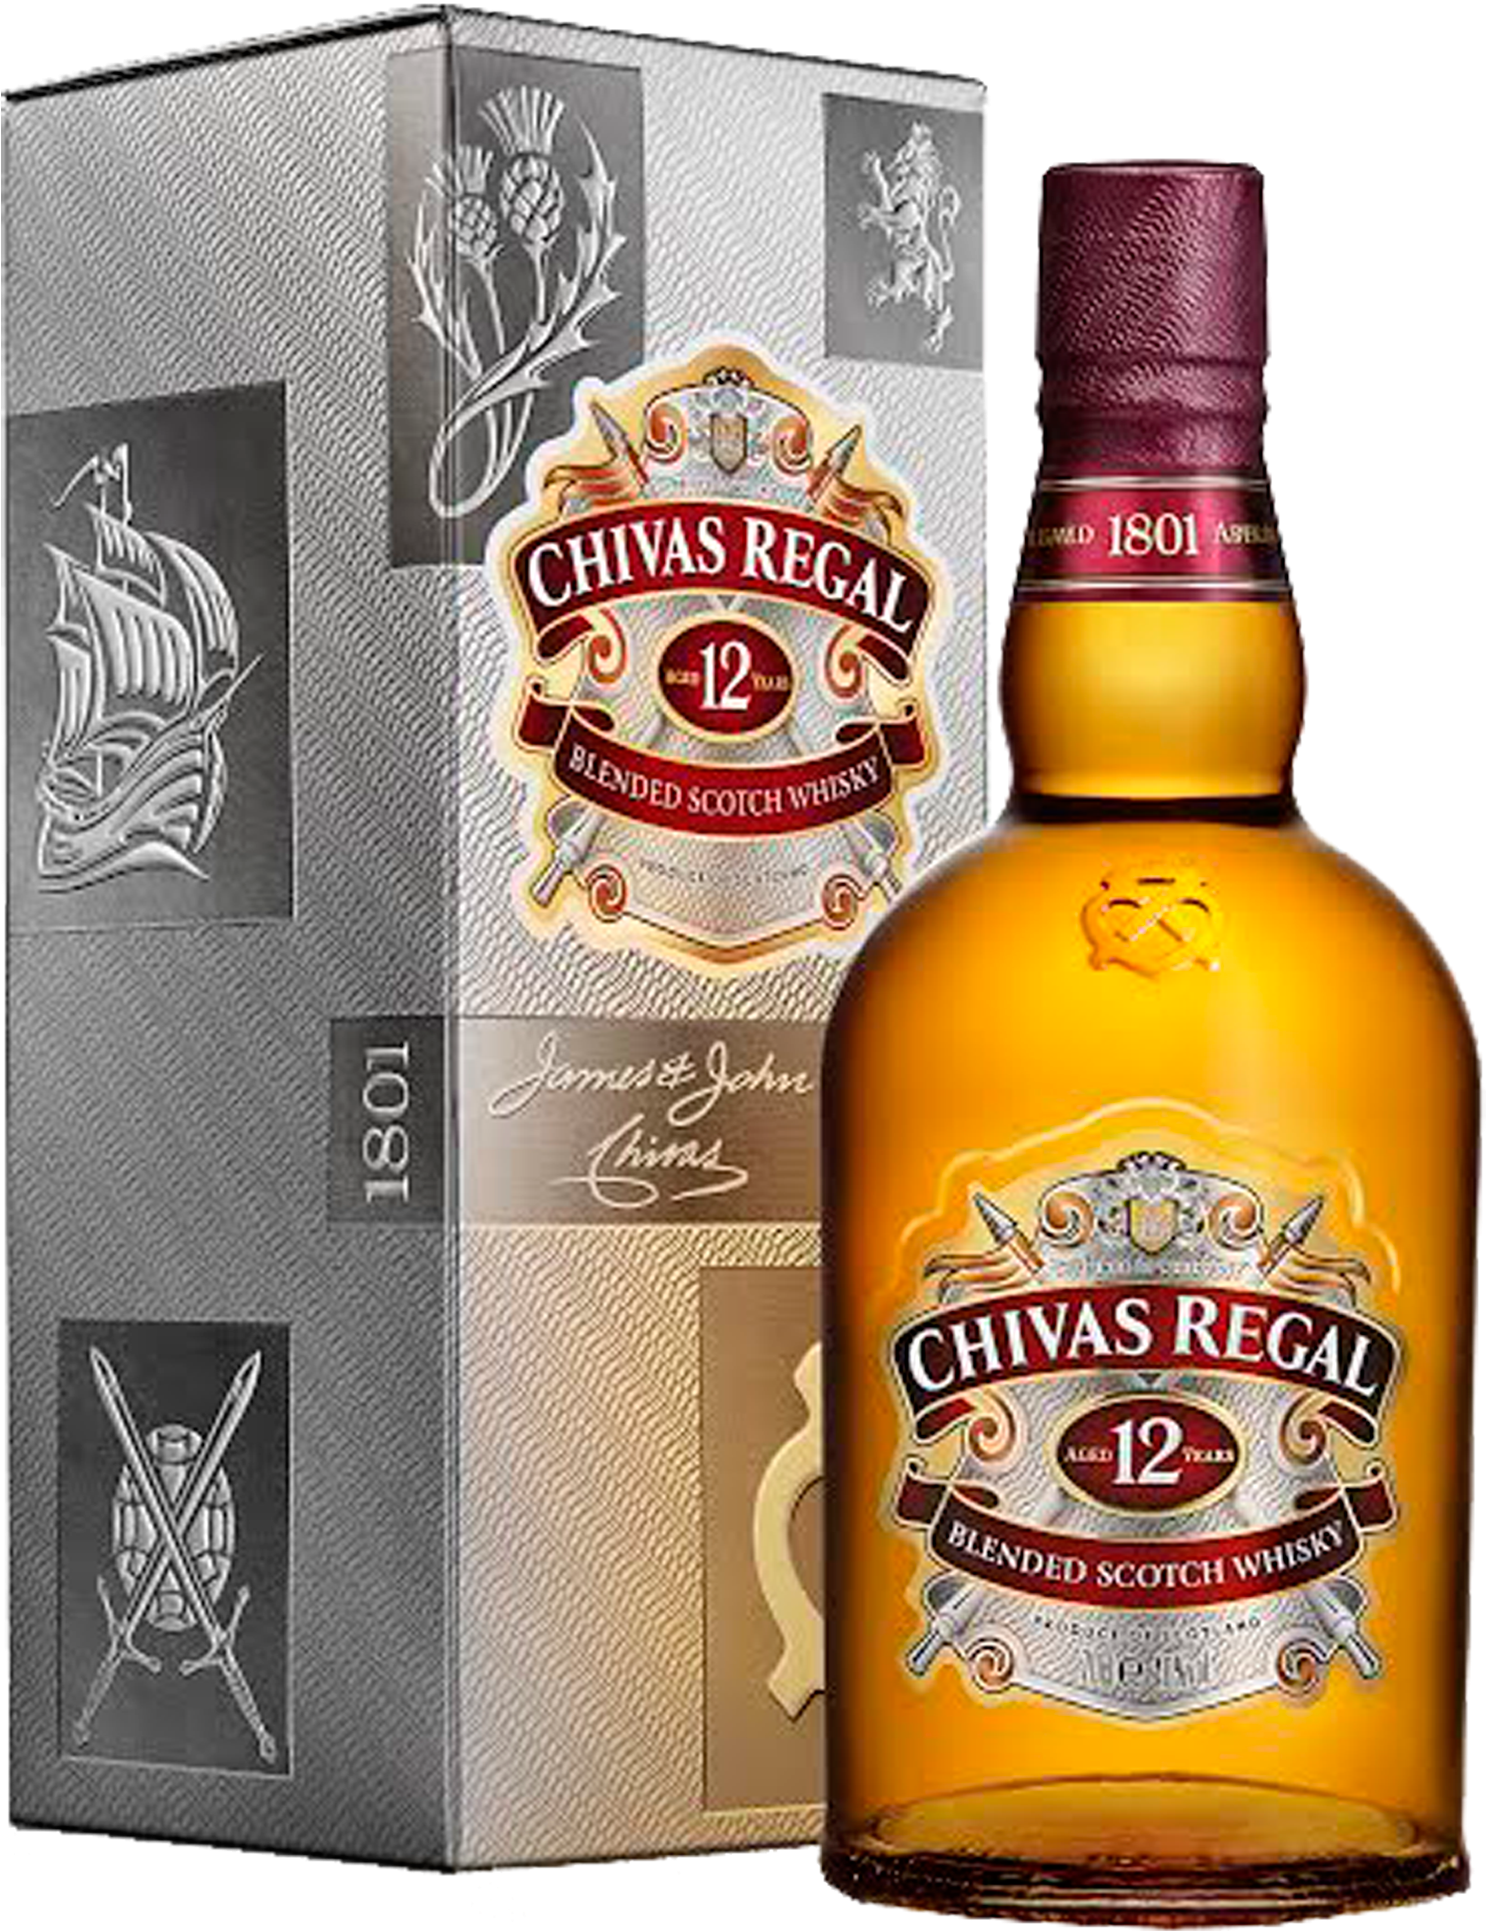 Download Chivas Regal 12 Year Old Scotch Whisky 700ml Bottle Chivas Regal Png Image With No Background Pngkey Com